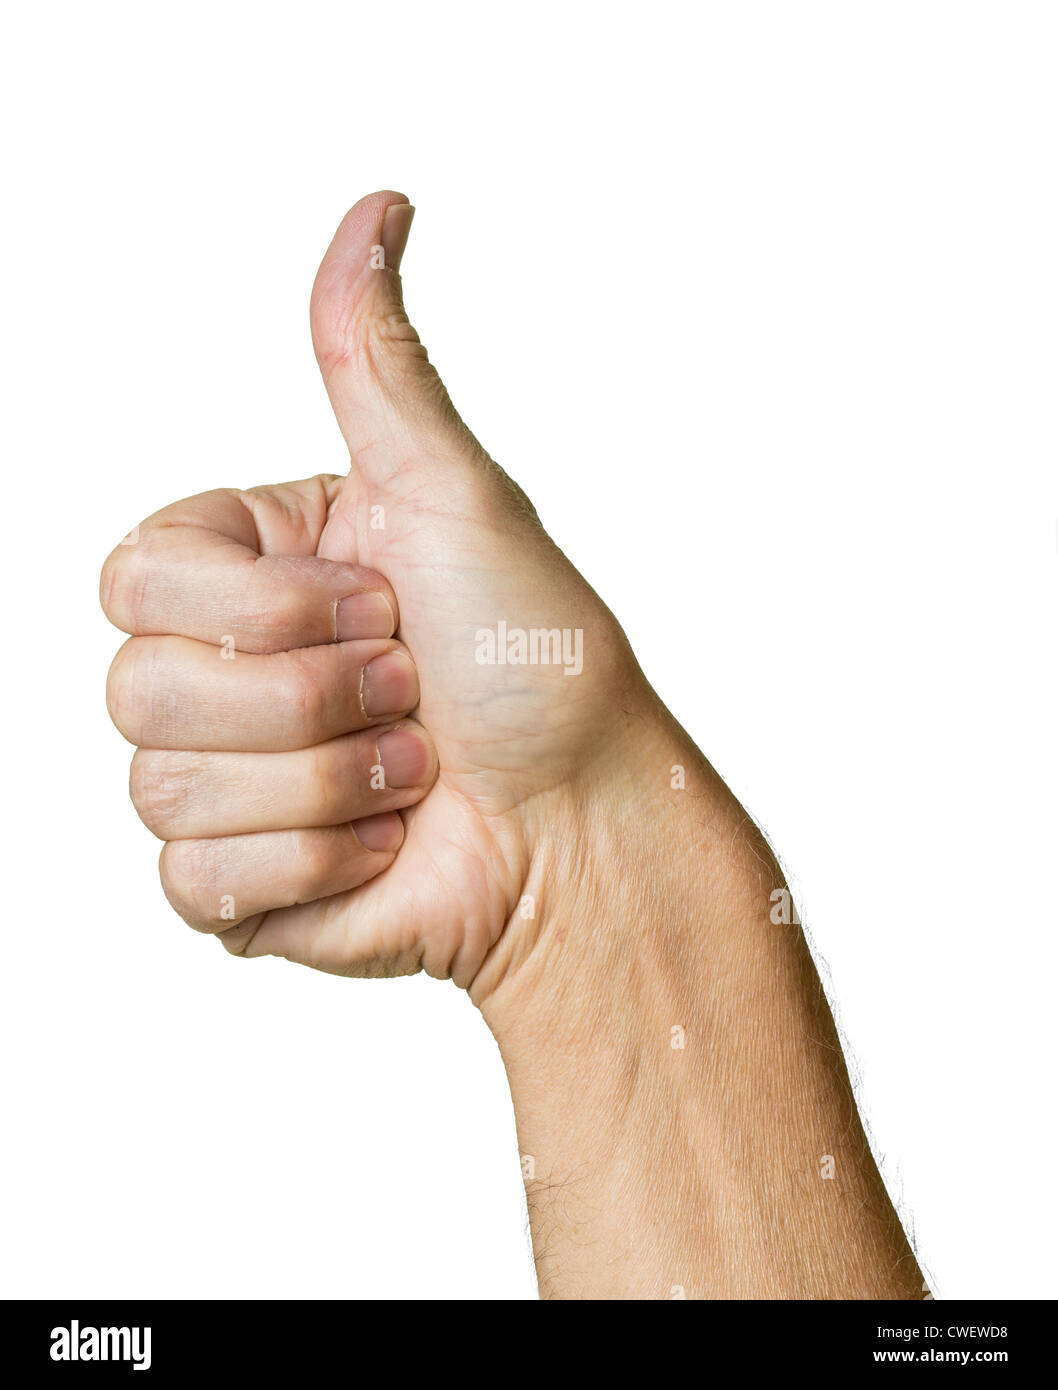 Man making thumbs up gesture in the studio close up Stock Photo